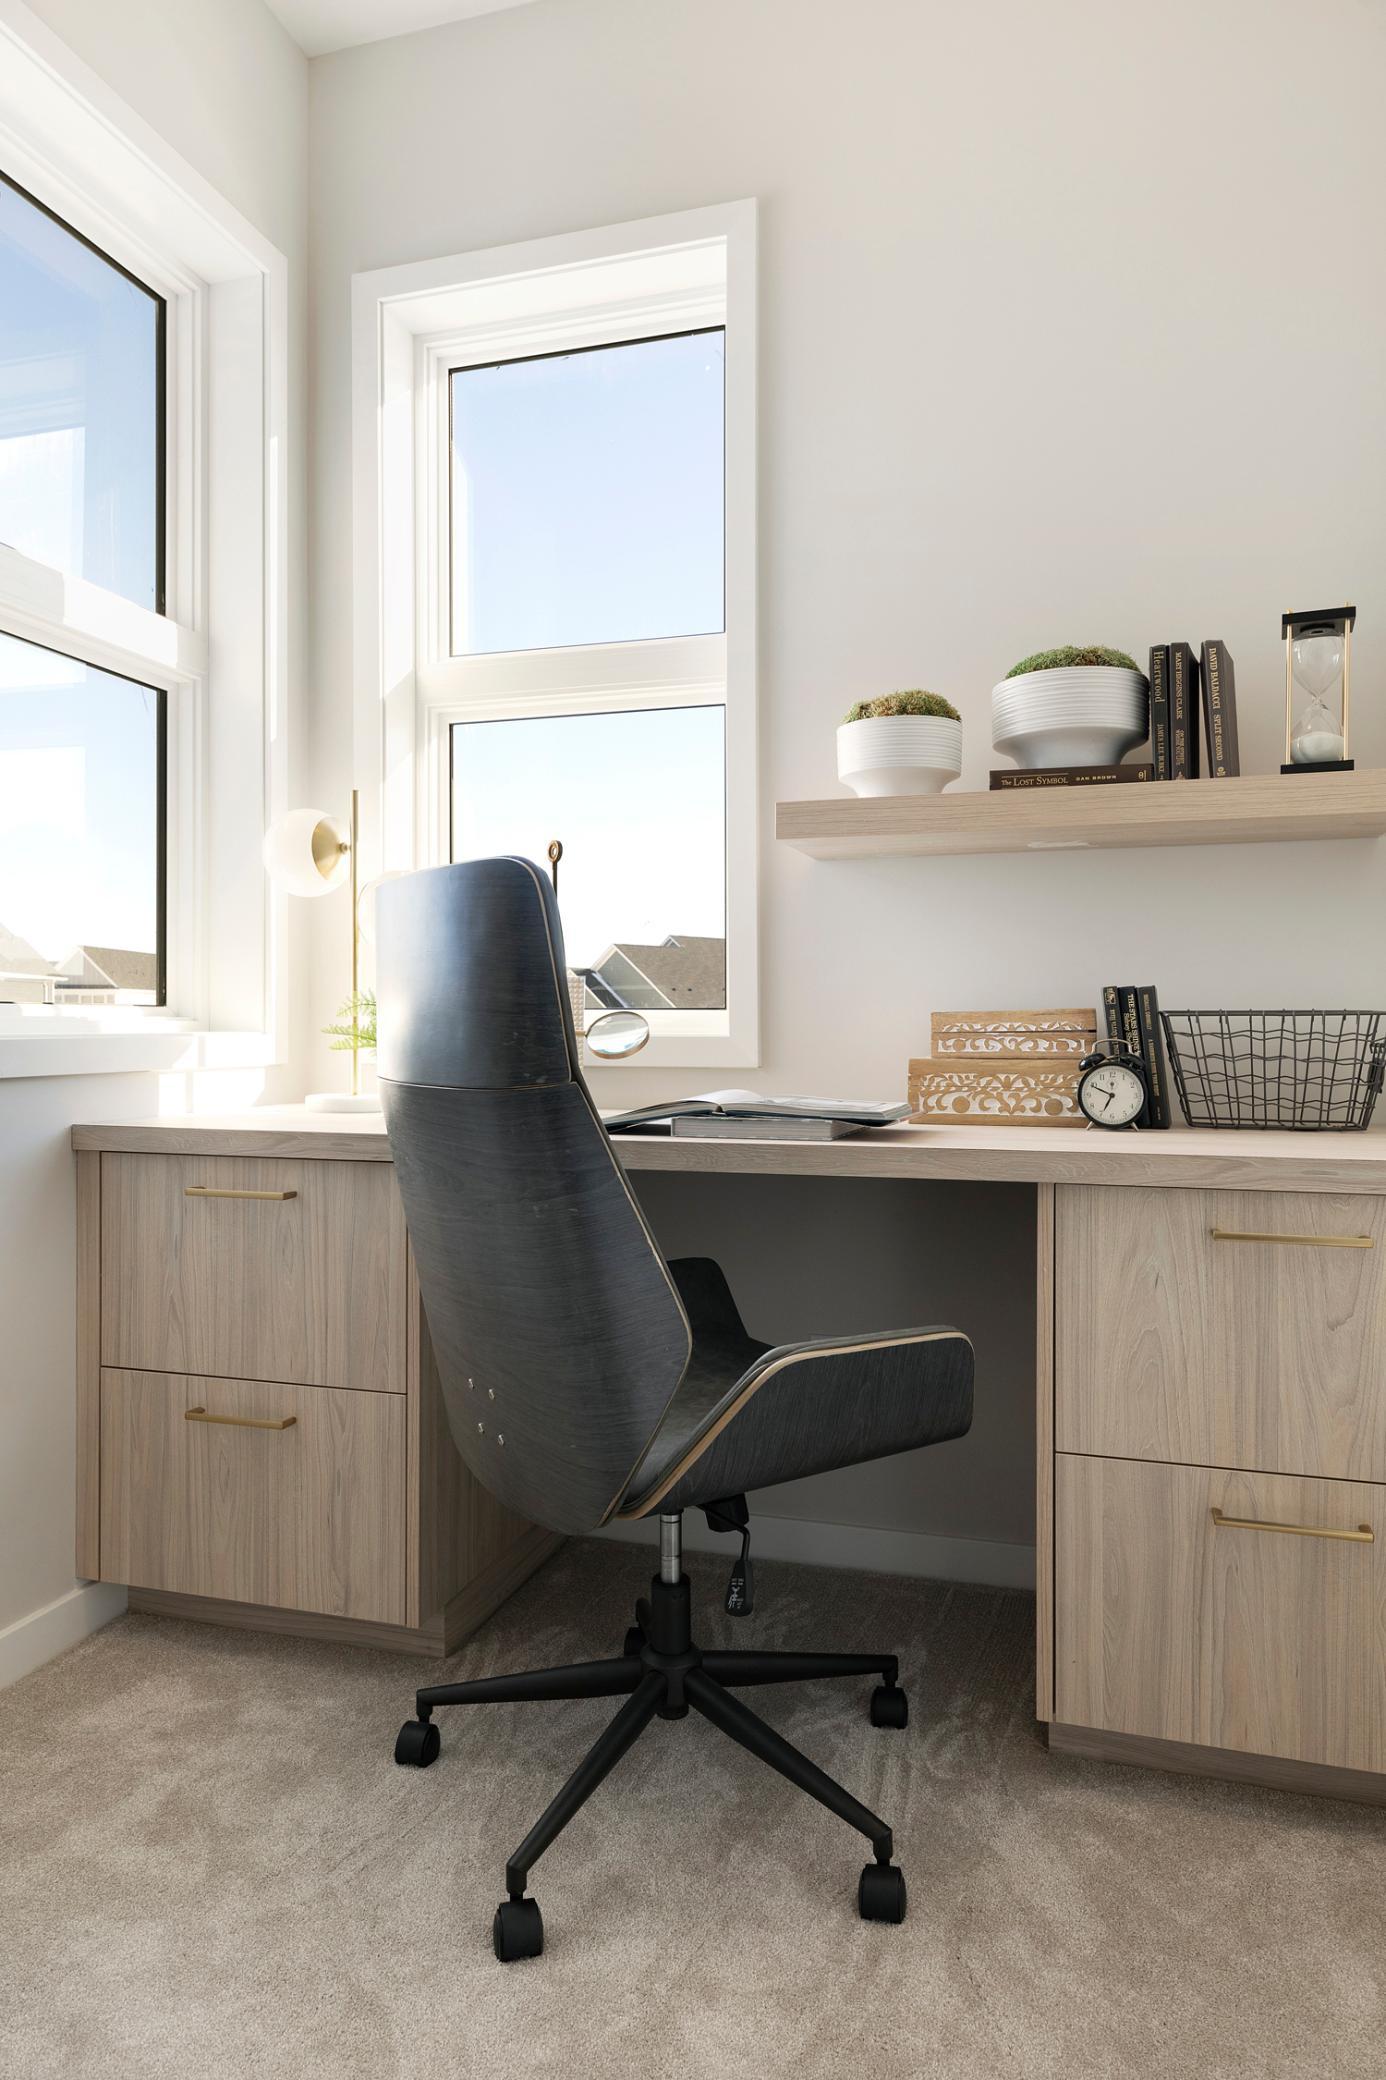 Built-in desk with a view. Photos are of model home; features and options may vary.